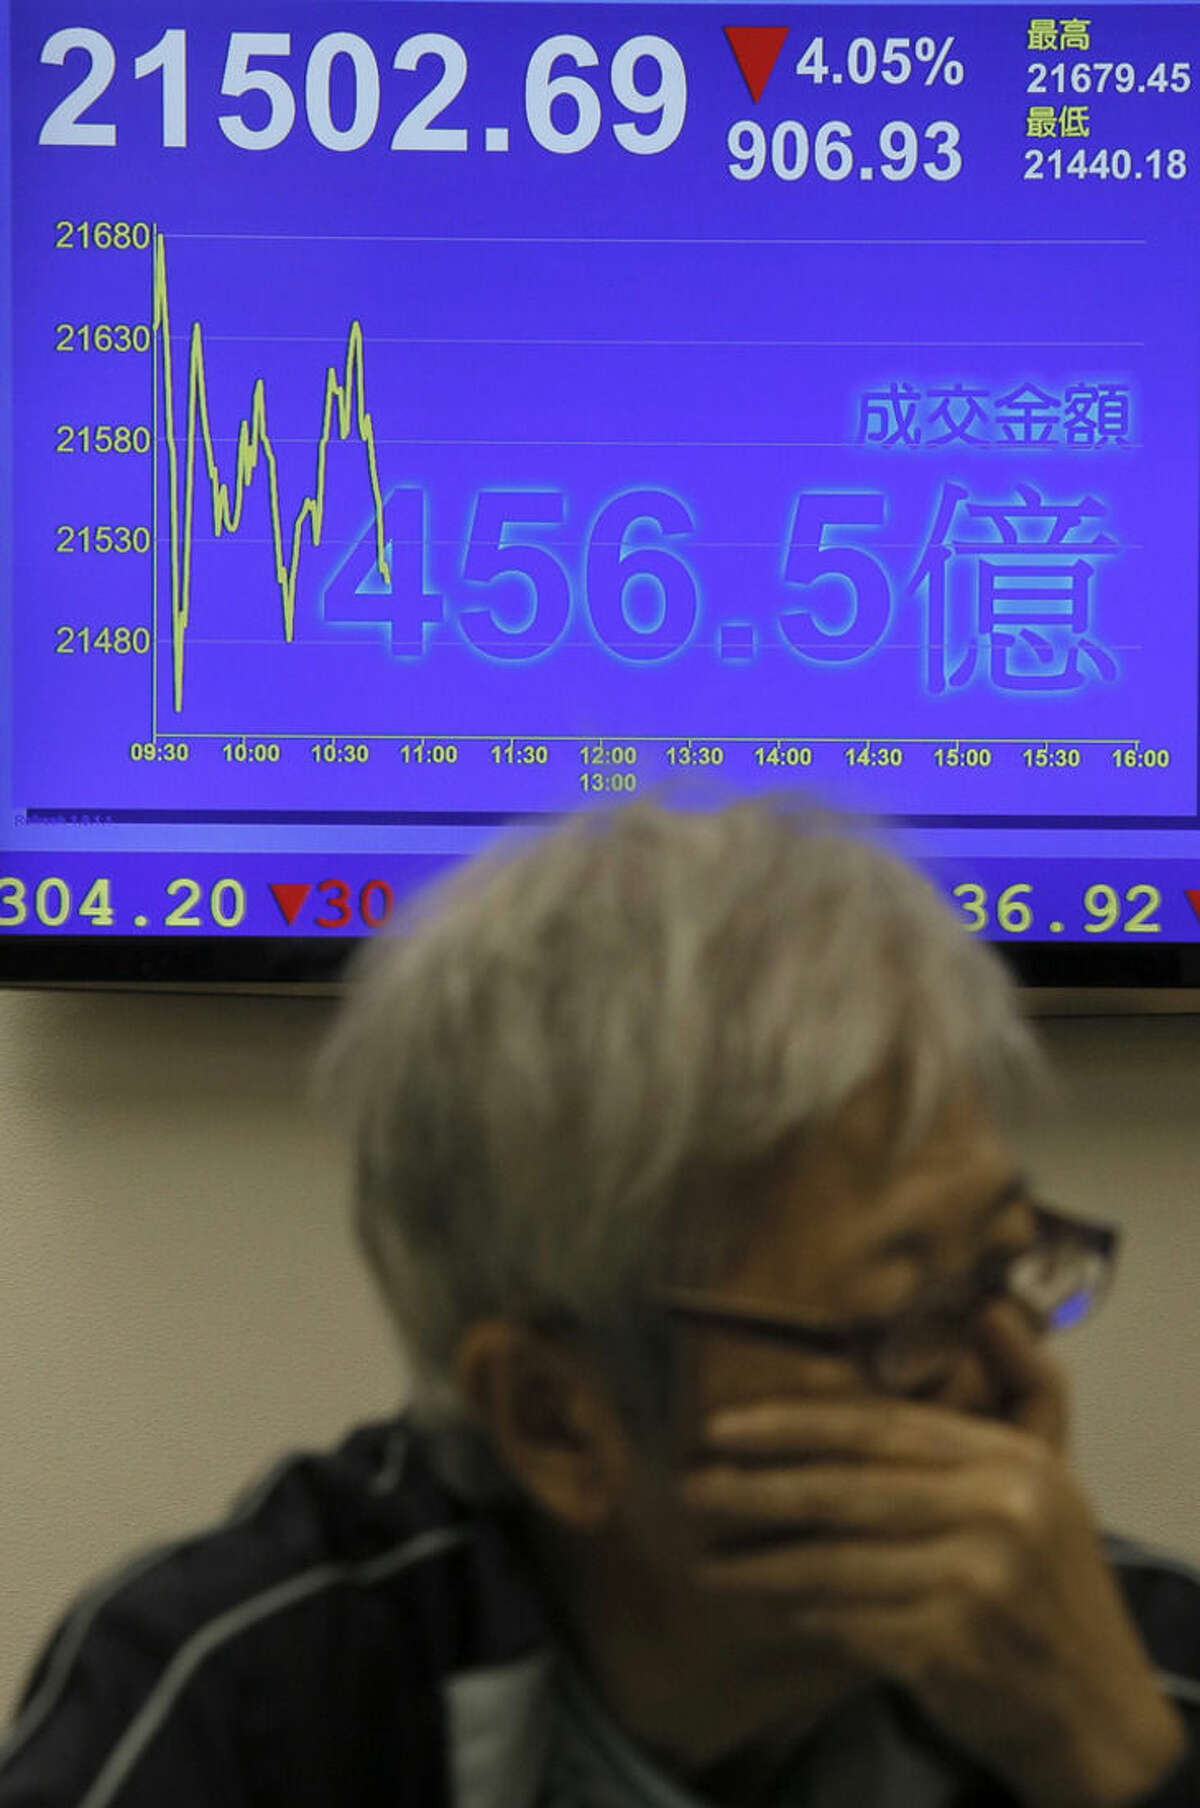 A woman looks at stock index near an electronic board showing the Hong Kong share index at a security company in Hong Kong, Monday, Aug. 24, 2015. Stocks got a dismal start to the week in Asia, with China’s main index losing up to 8.6 percent Monday as investors shaken by the sell-off last week on Wall Street unloaded shares in practically every sector. (AP Photo/Vincent Yu)